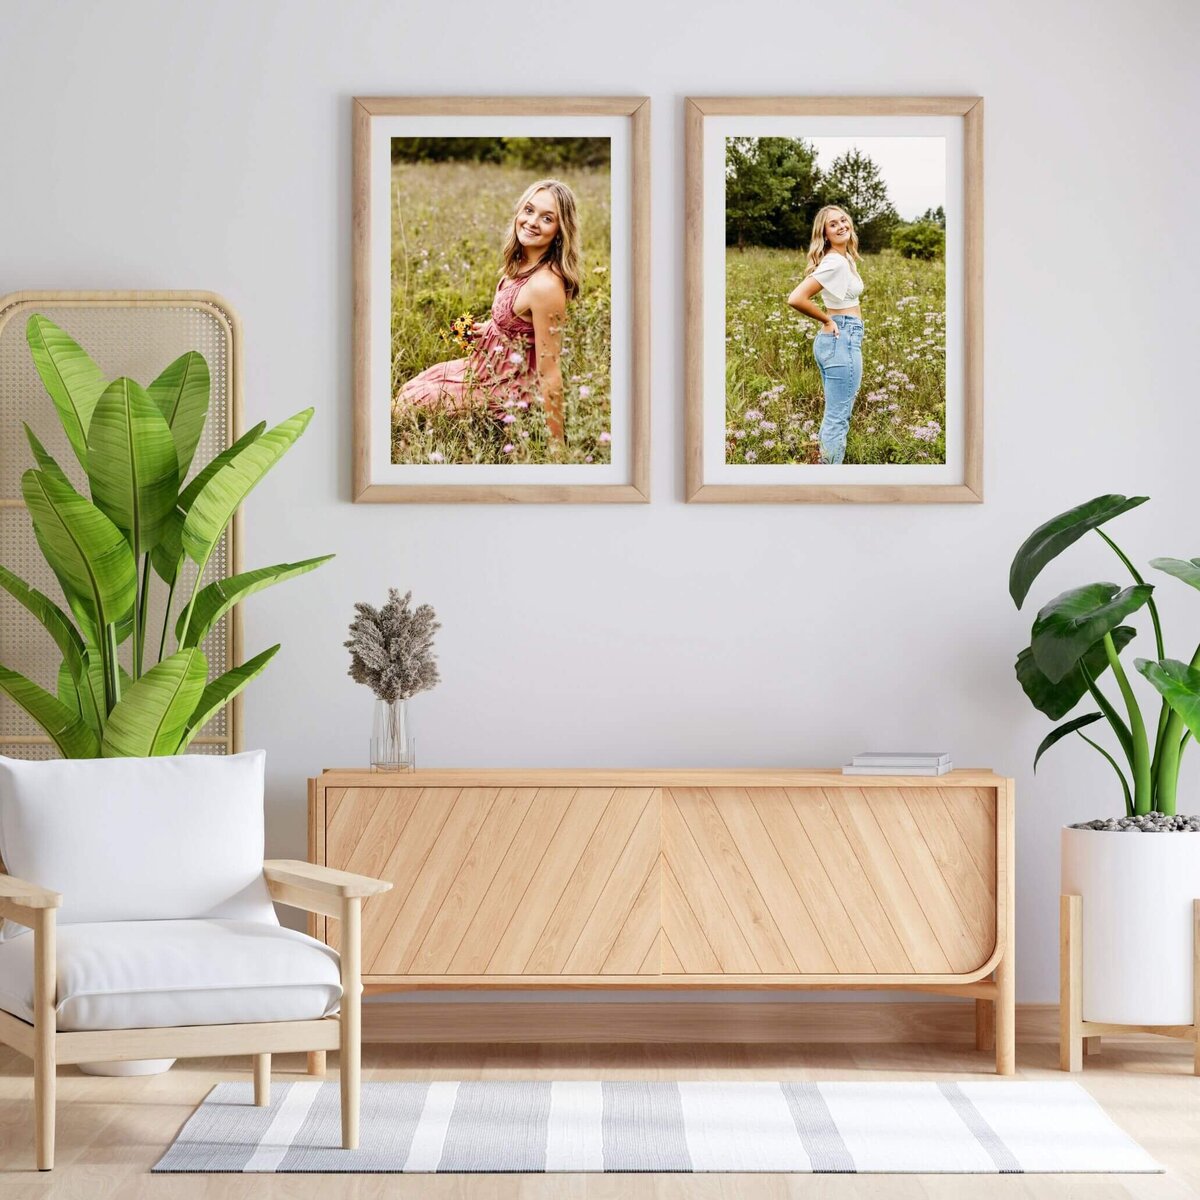 Image of 2 Green Bay Senior portraits hanging side by side in a simple and modern living area.